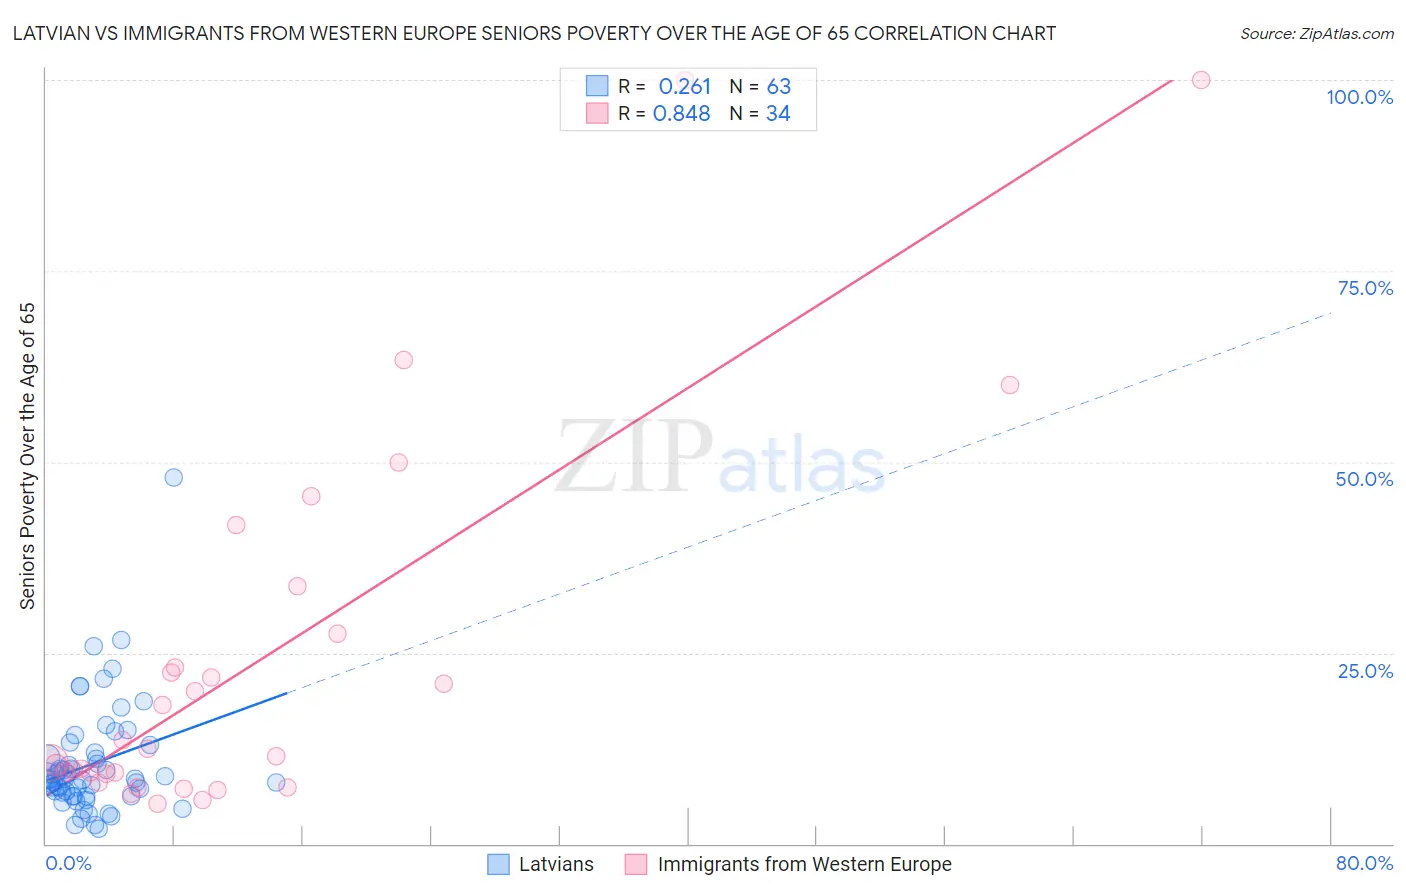 Latvian vs Immigrants from Western Europe Seniors Poverty Over the Age of 65